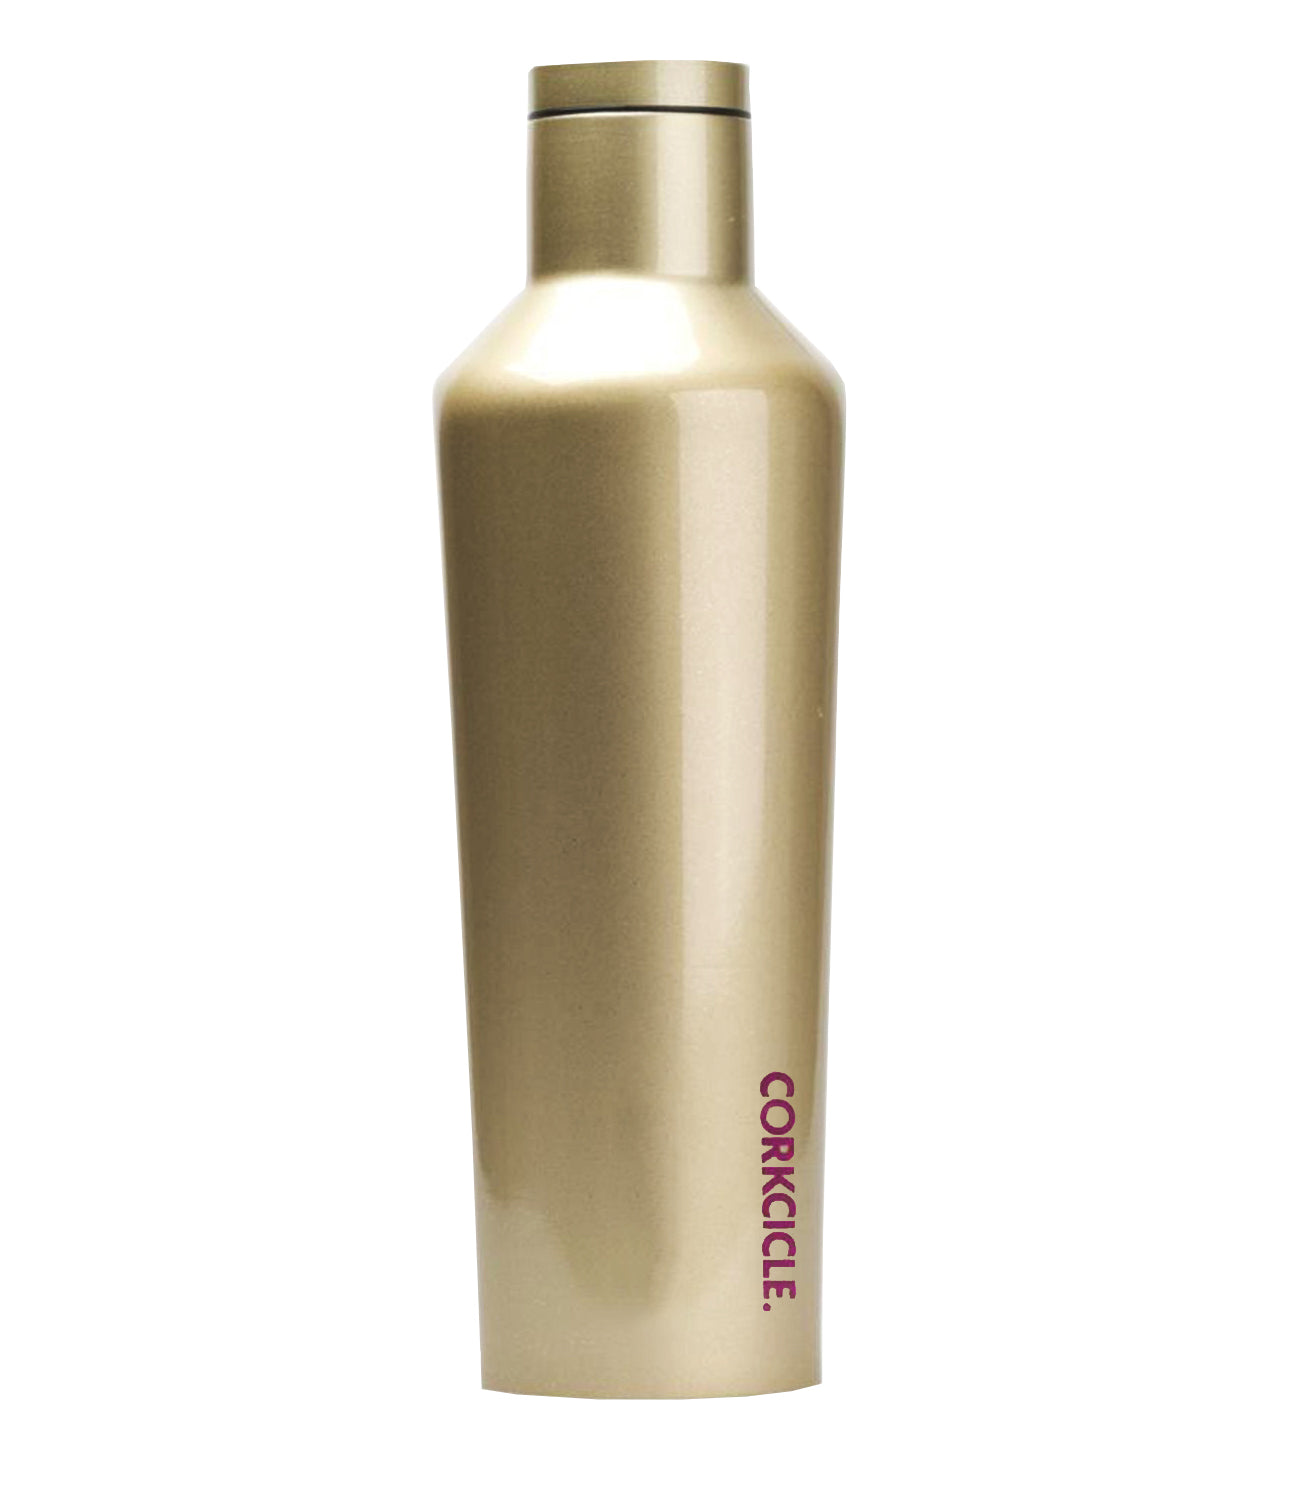 Corkcicle Unicorn Magic Collection Canteen Glampagne 16oz